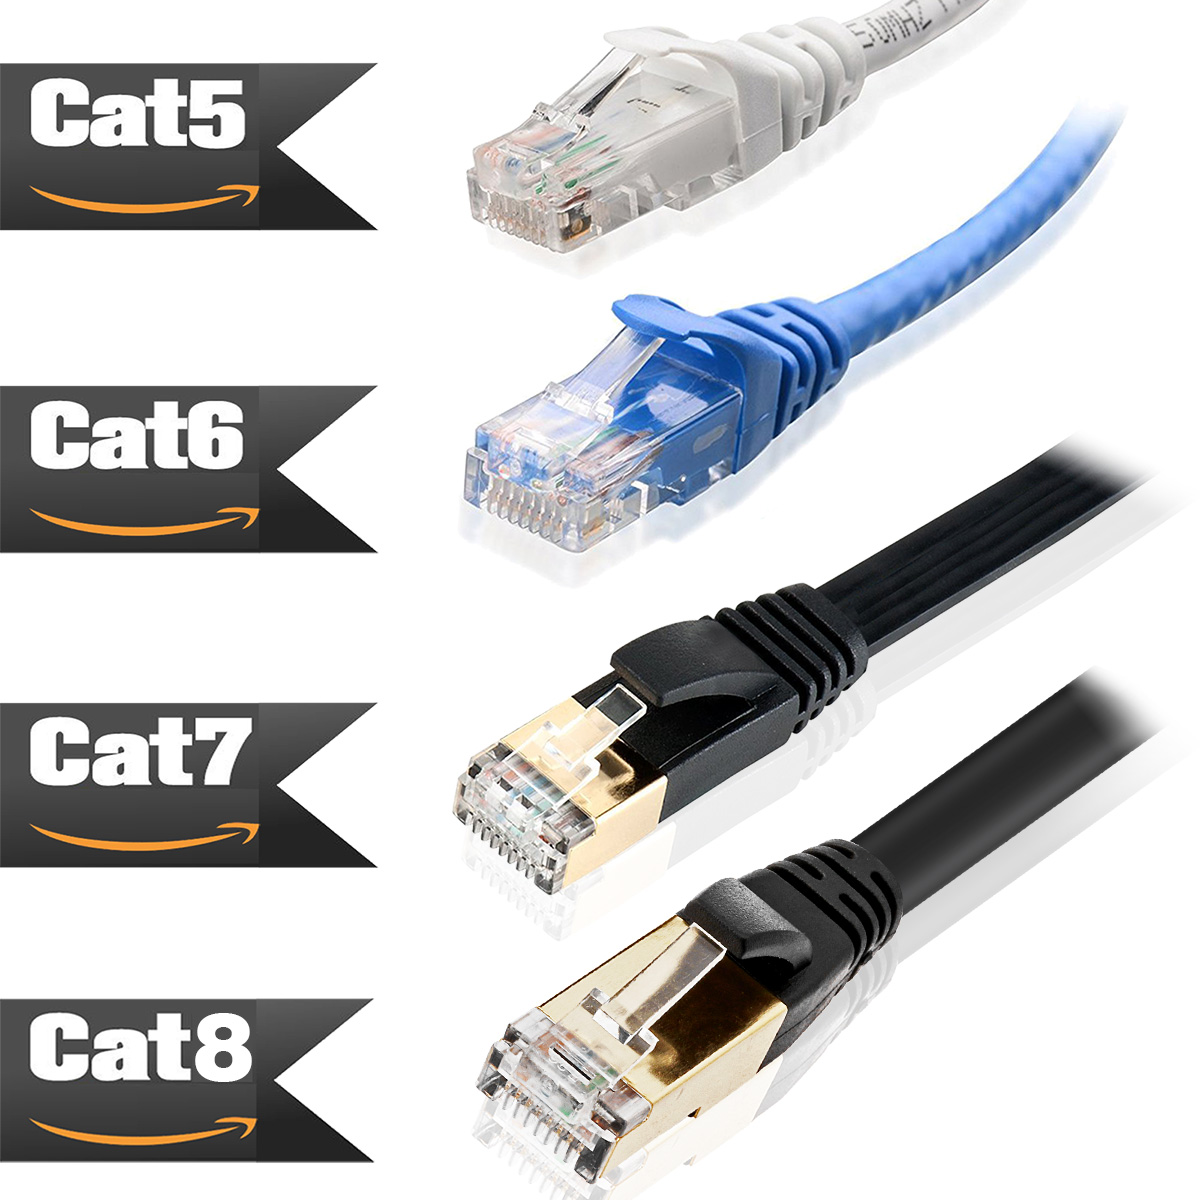 2019 PREMIUM Ethernet Cable CAT 8 7 Ultra High Speed LAN Patch Cord 6-100ft Lot | eBay